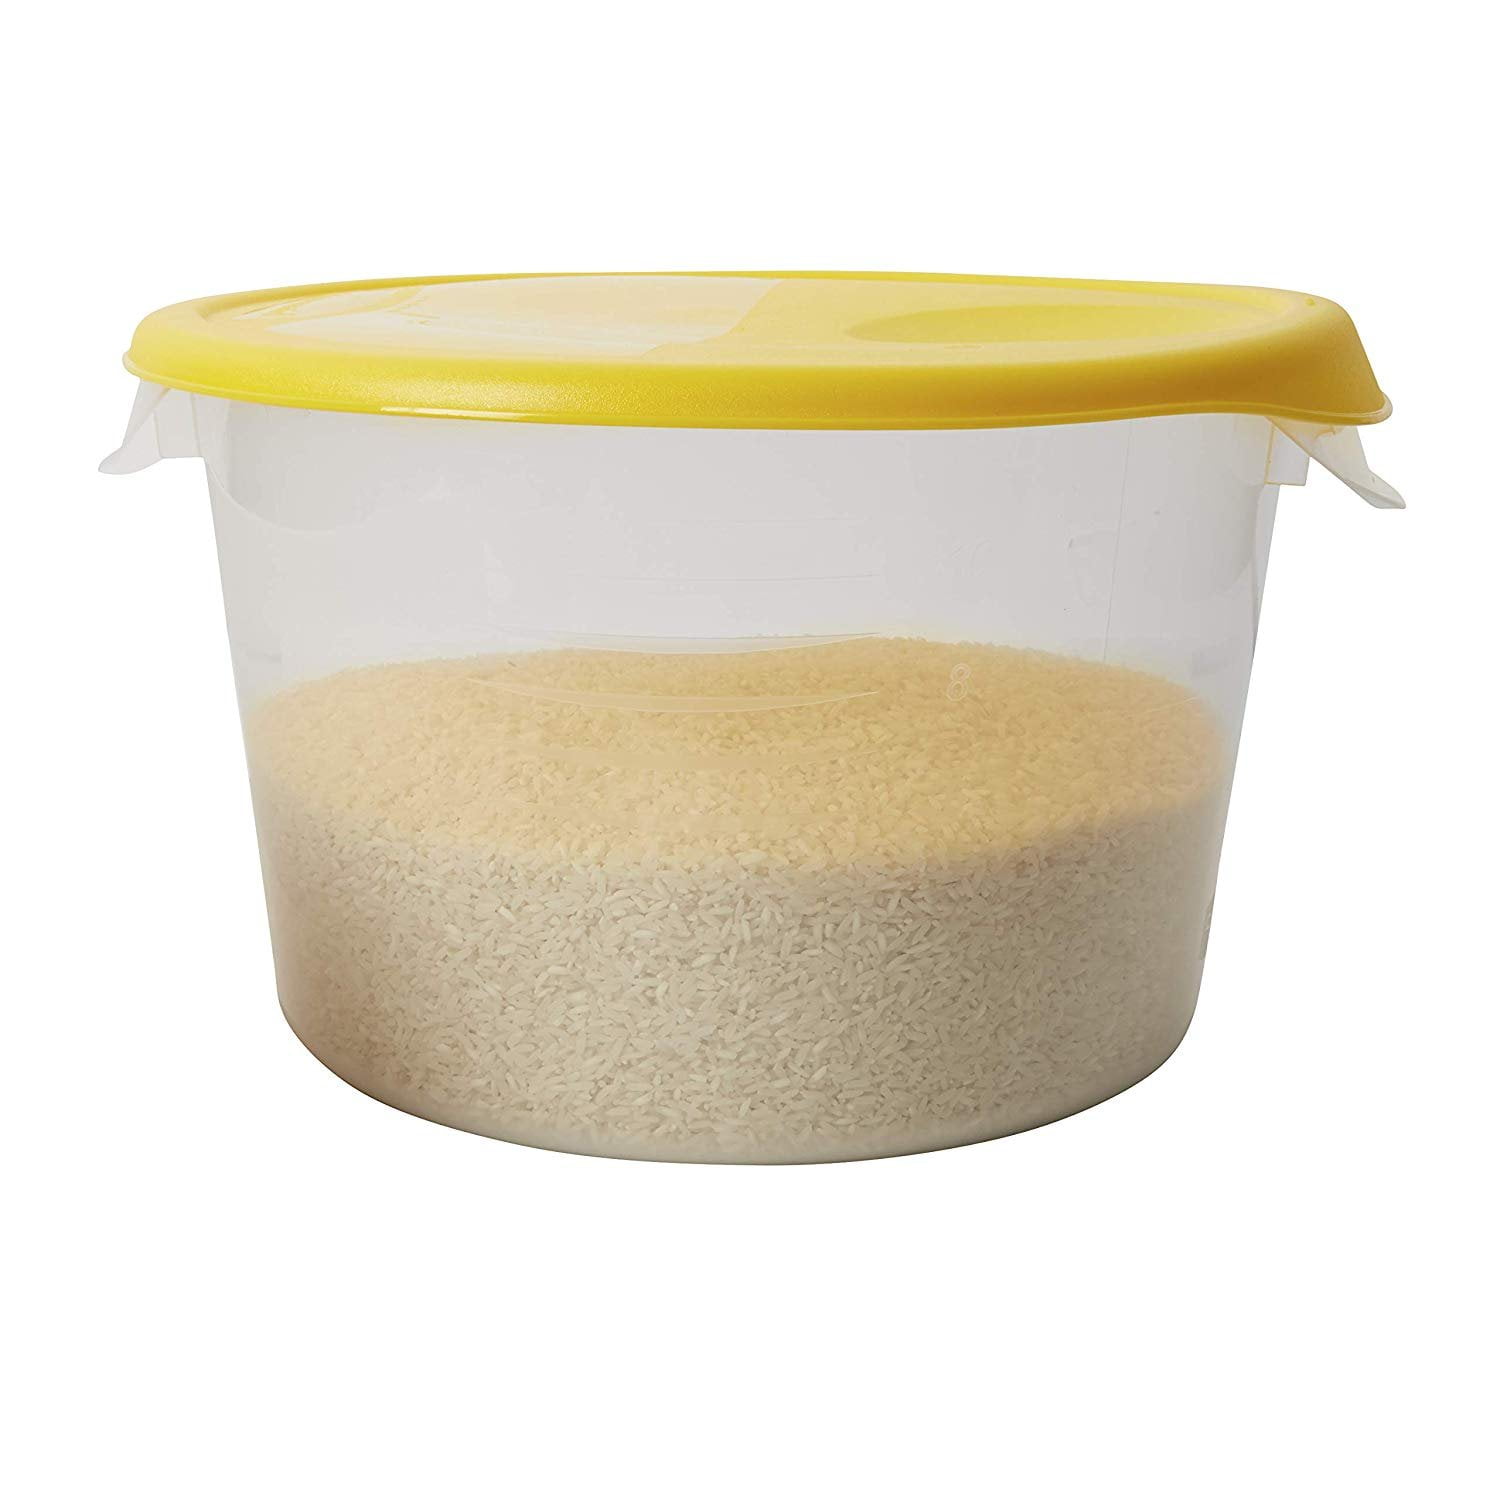 Round Storage Container (6 qt.) // Central Milling // Baking Tools